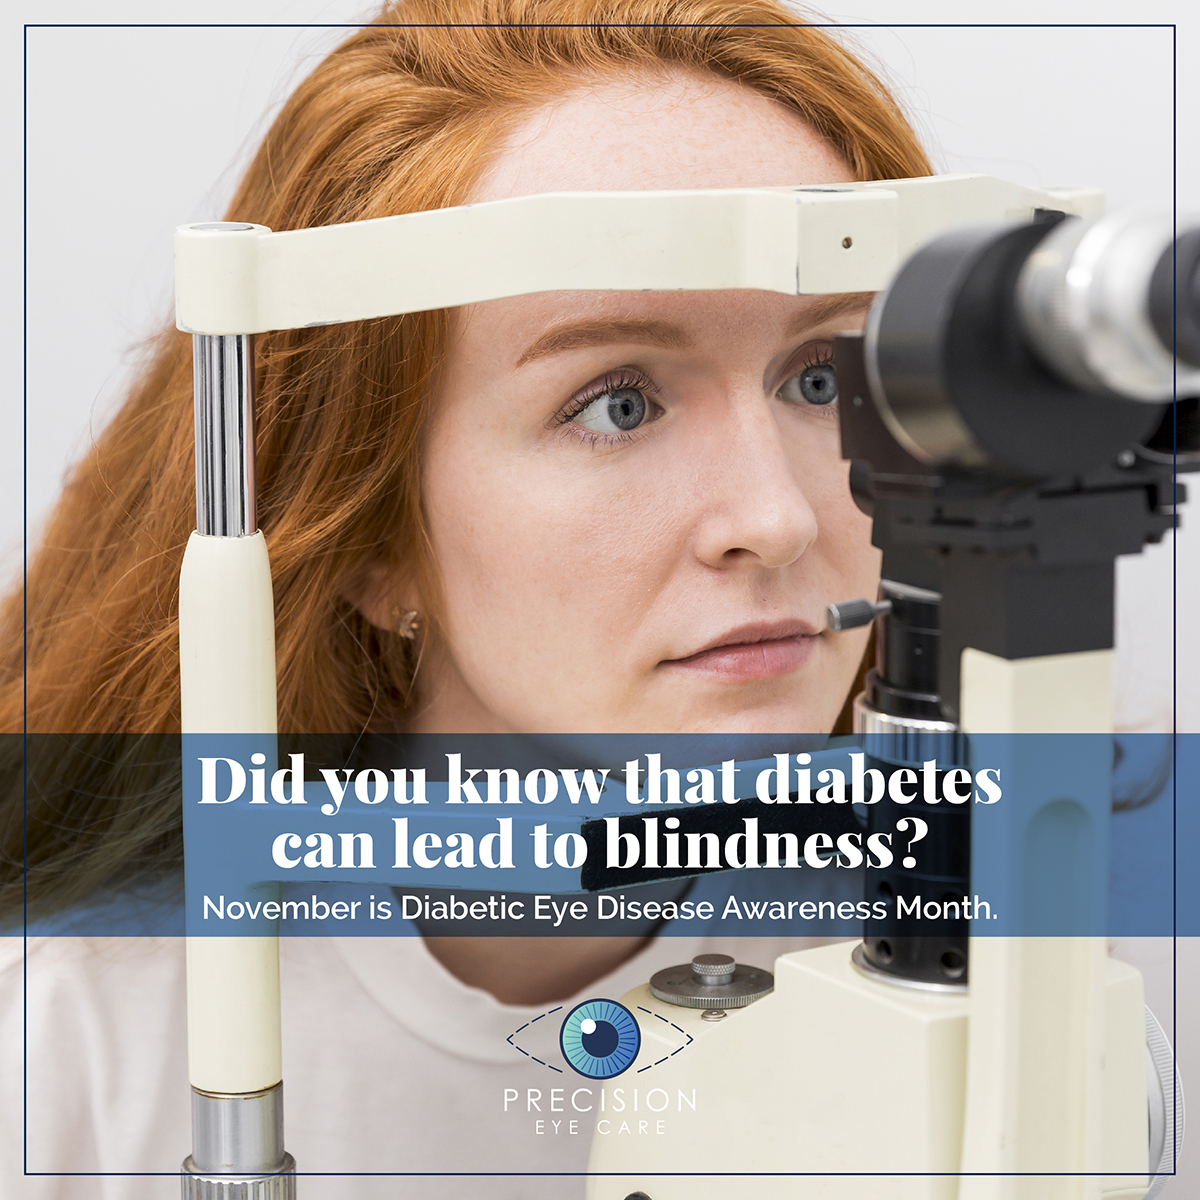 Did you know that diabetes can lead to blindness?